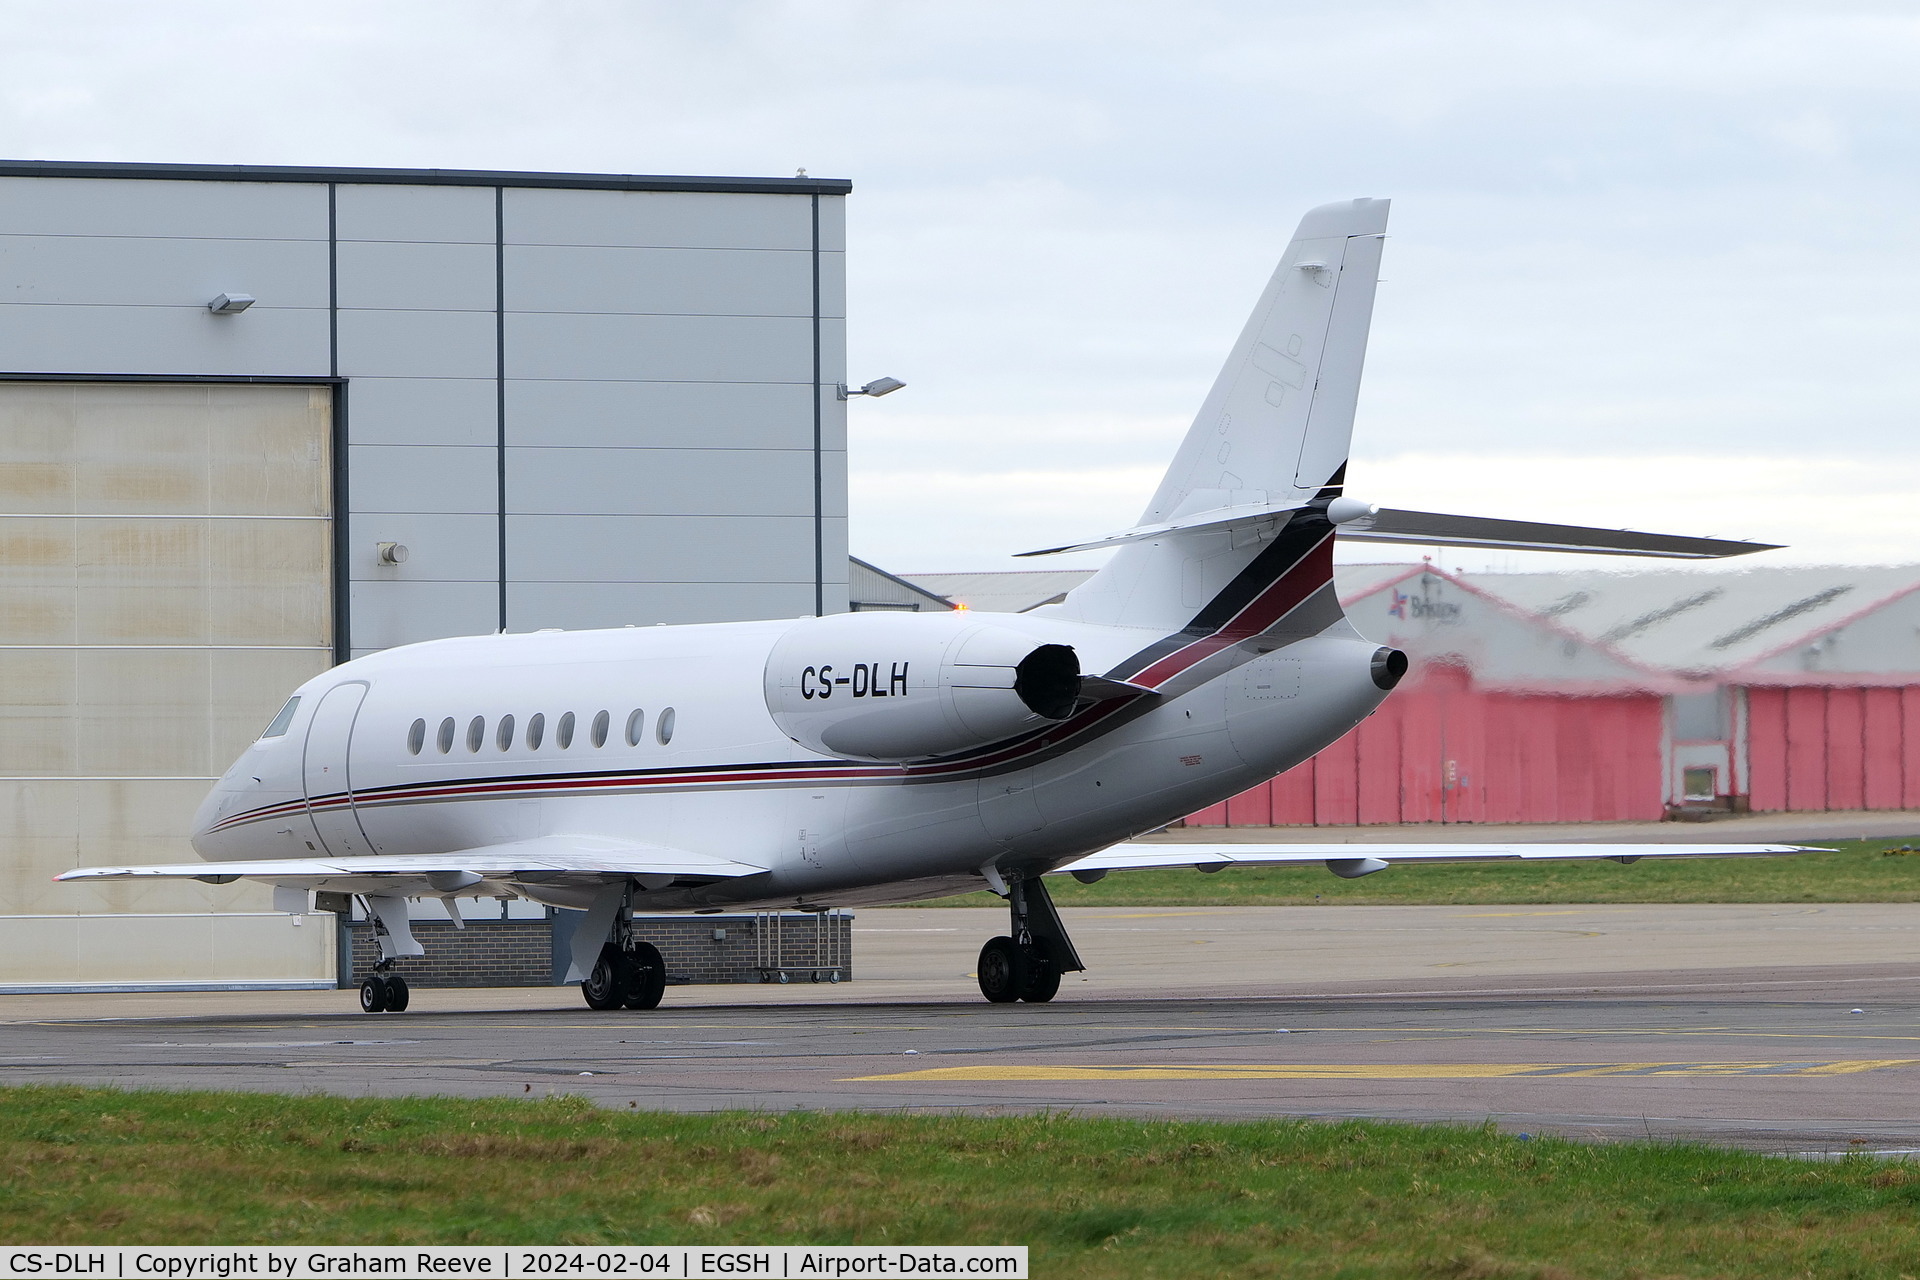 CS-DLH, 2007 Dassault Falcon 2000EX C/N 149, Just landed at Norwich.